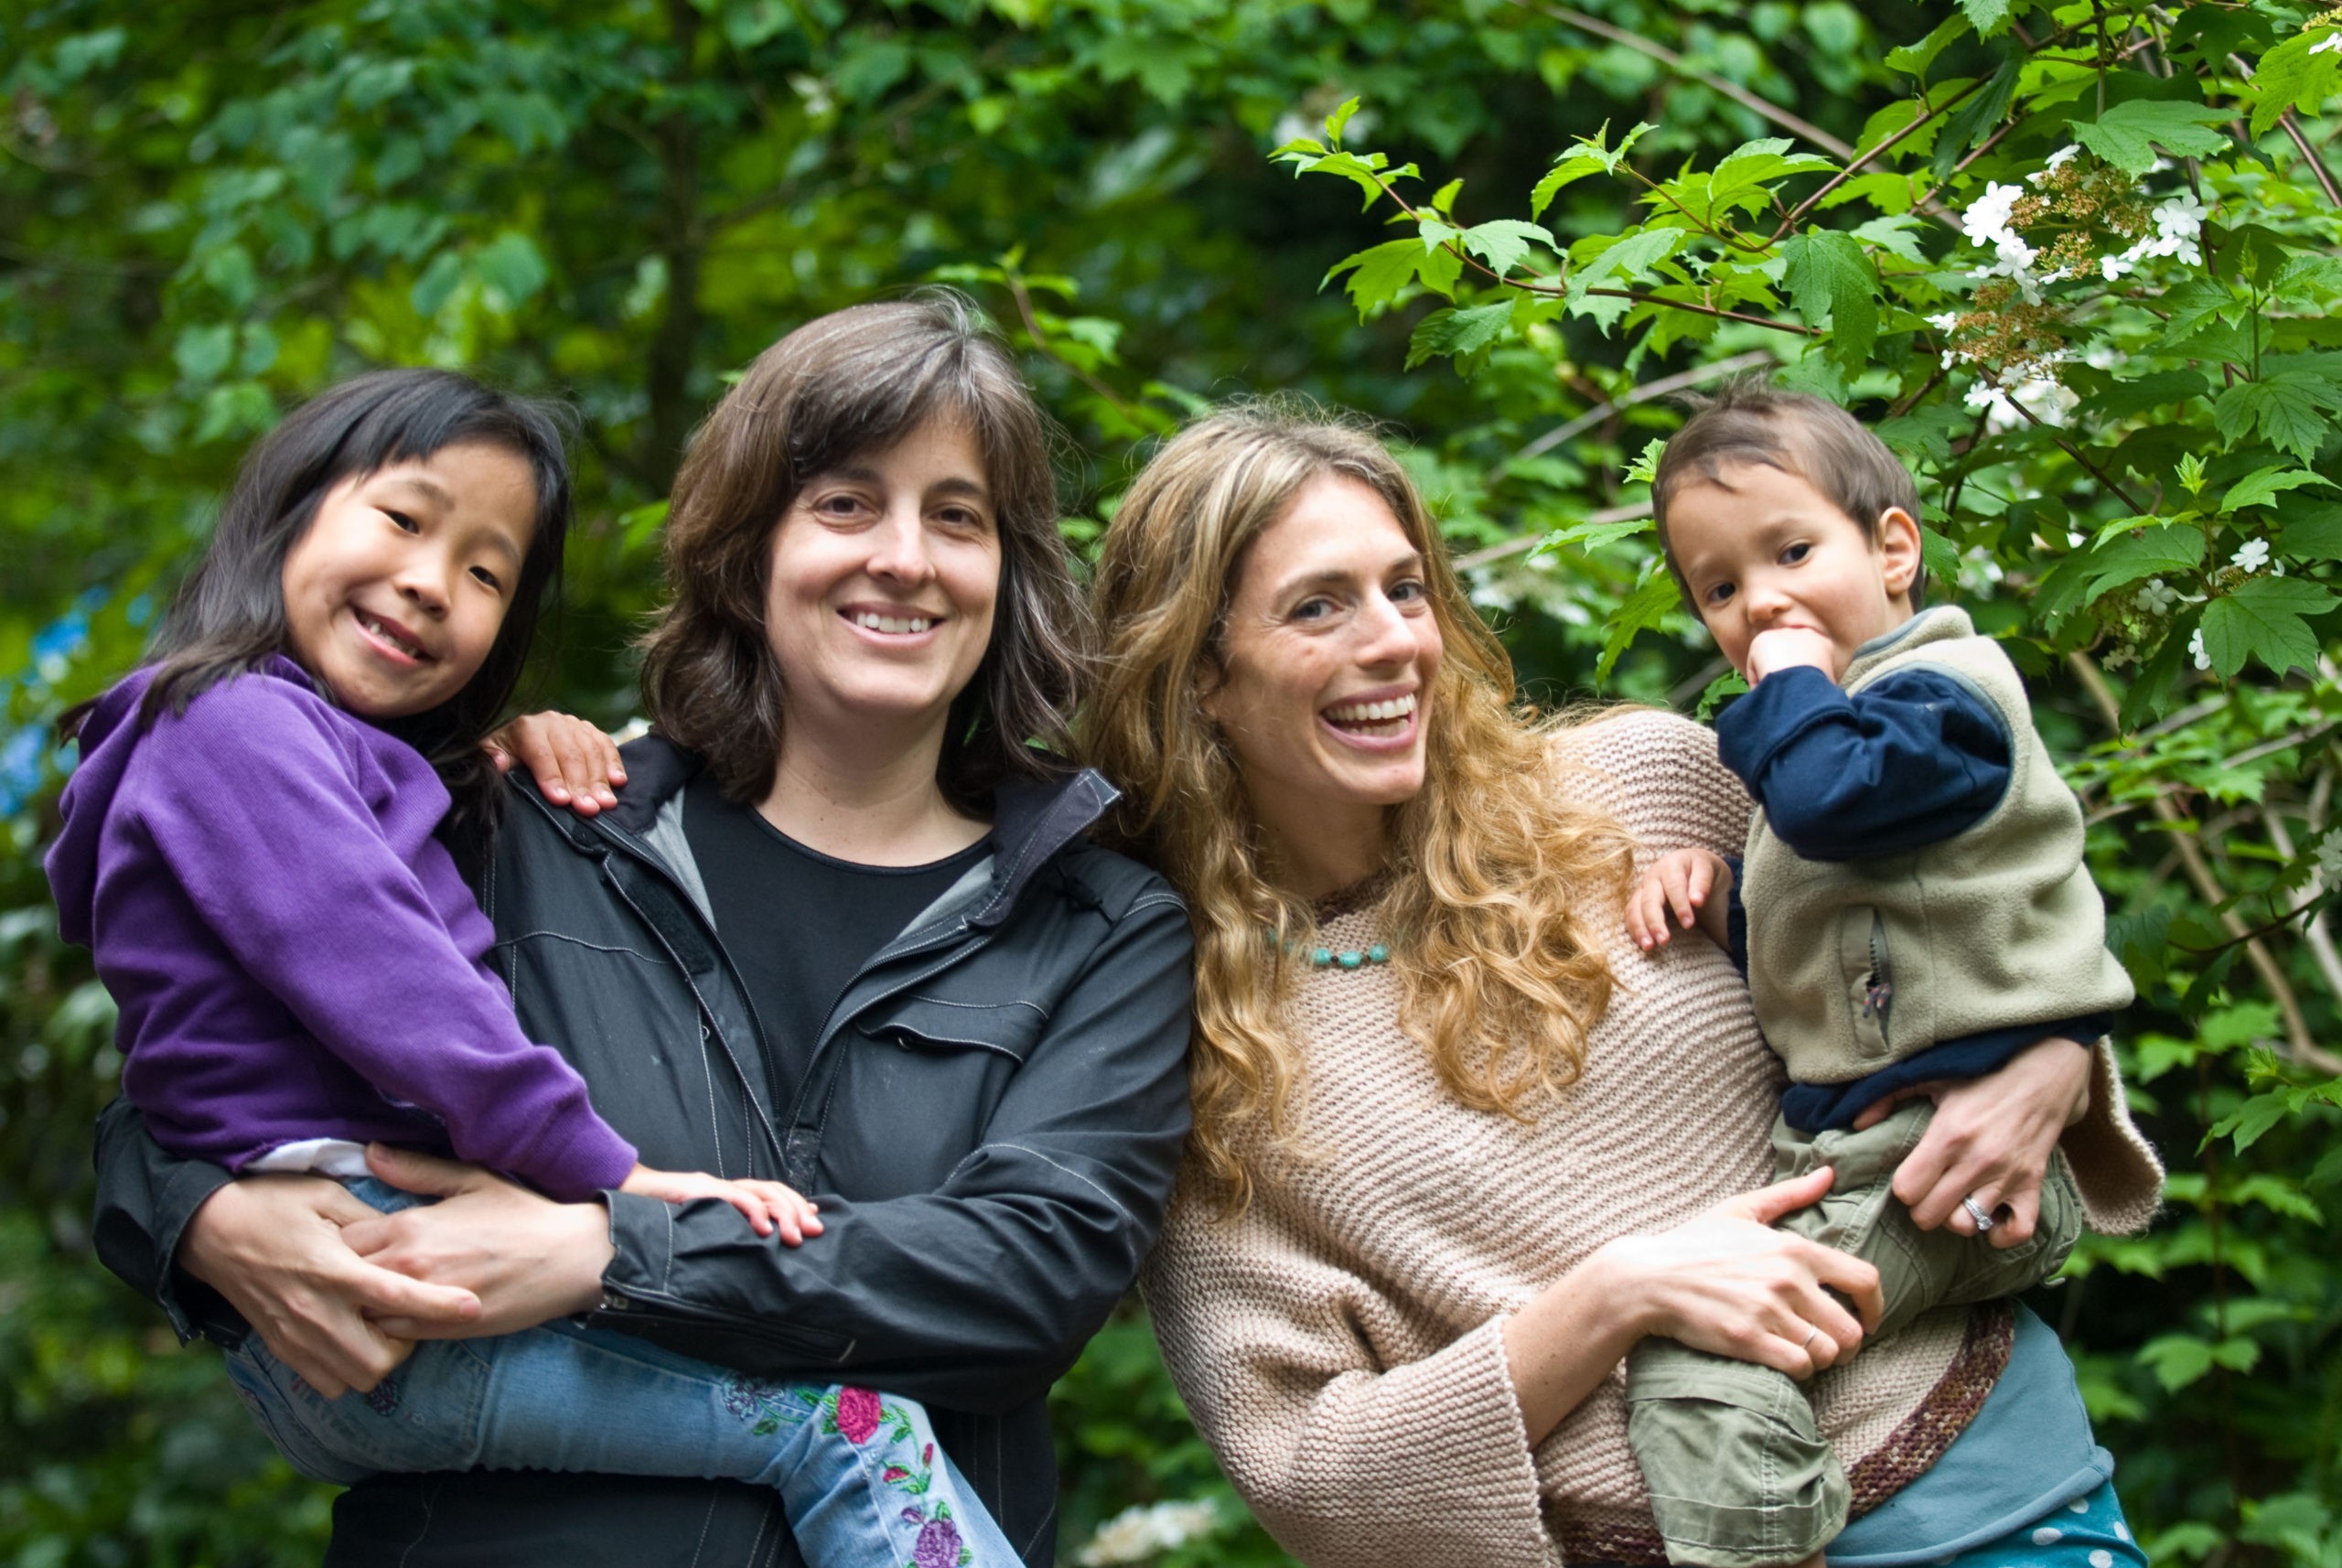 Mishelle Rudzinksi and Cindy Kaplan, SPOON's co-founders, holding their two children